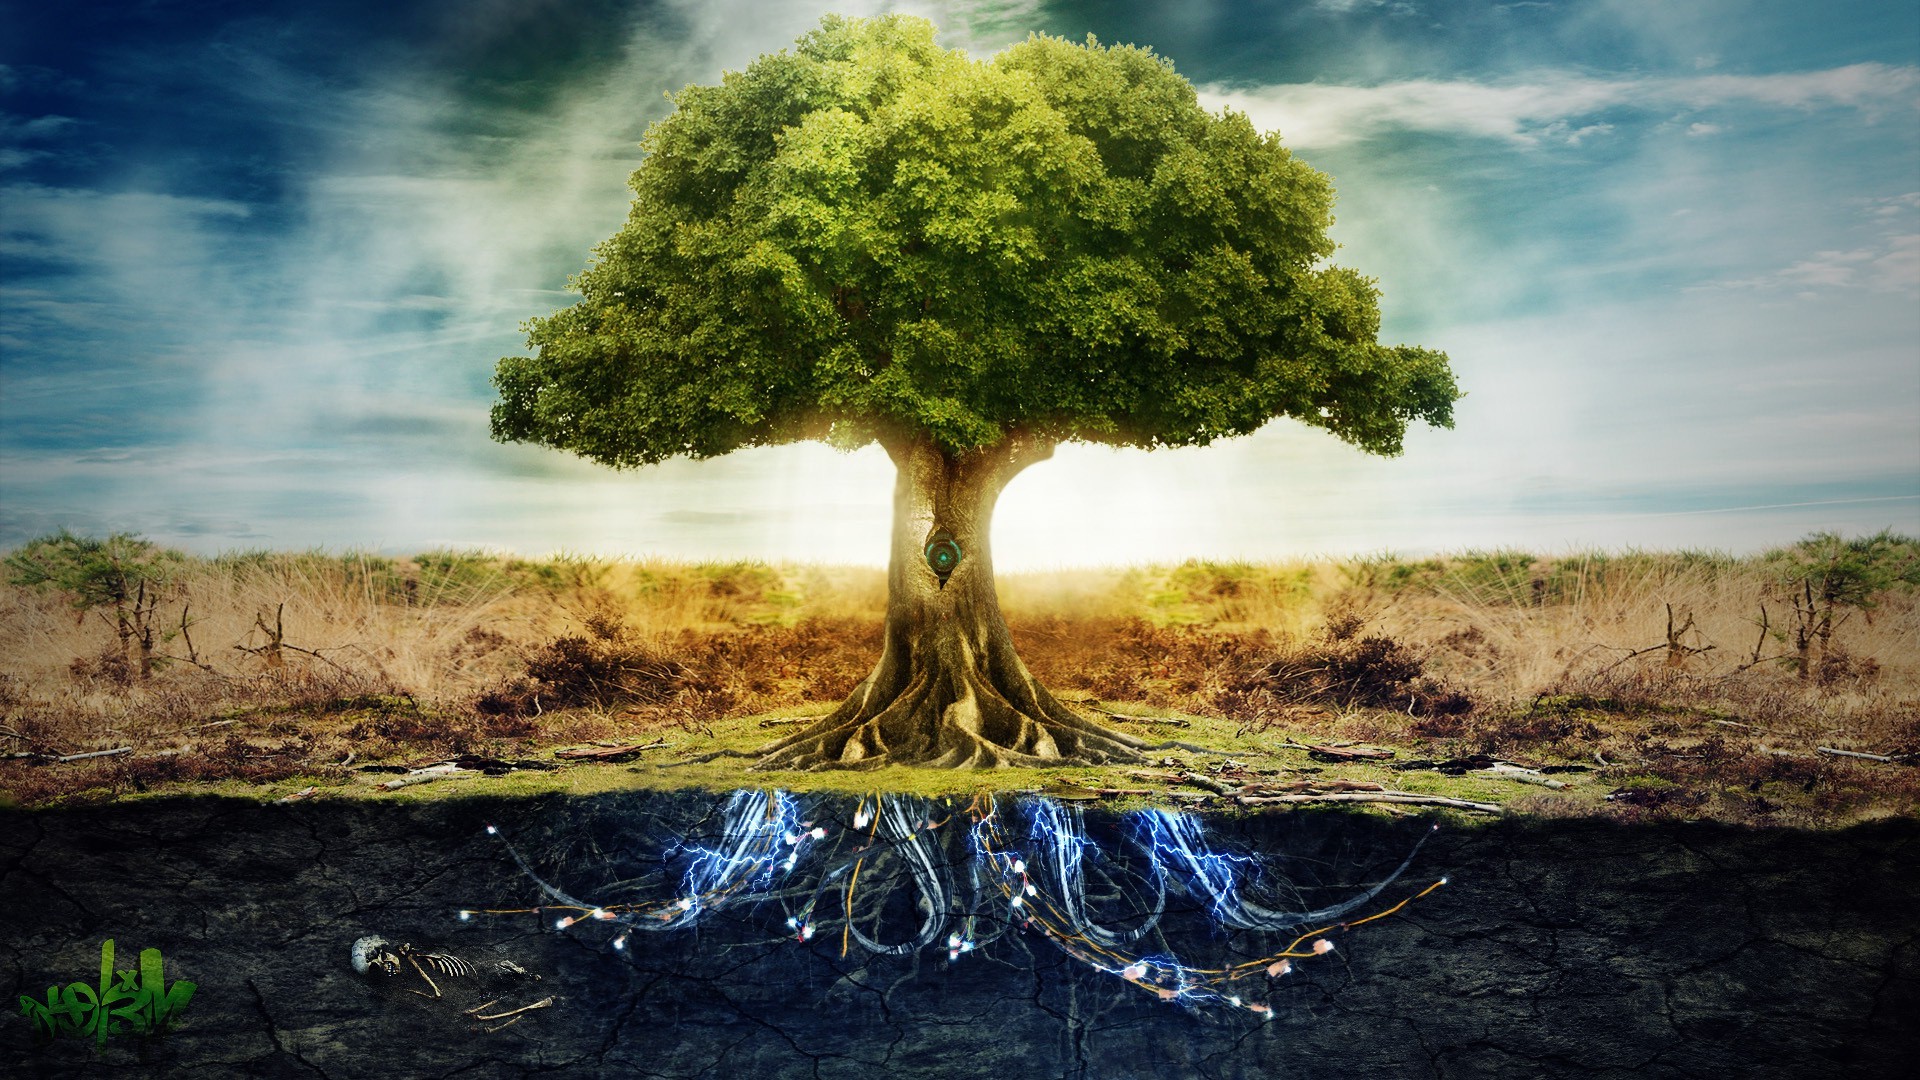 anime, Technology, Peace, Photo Manipulation, Electricity, Trees, Split View, Roots, Skeleton, Digital Art Wallpaper